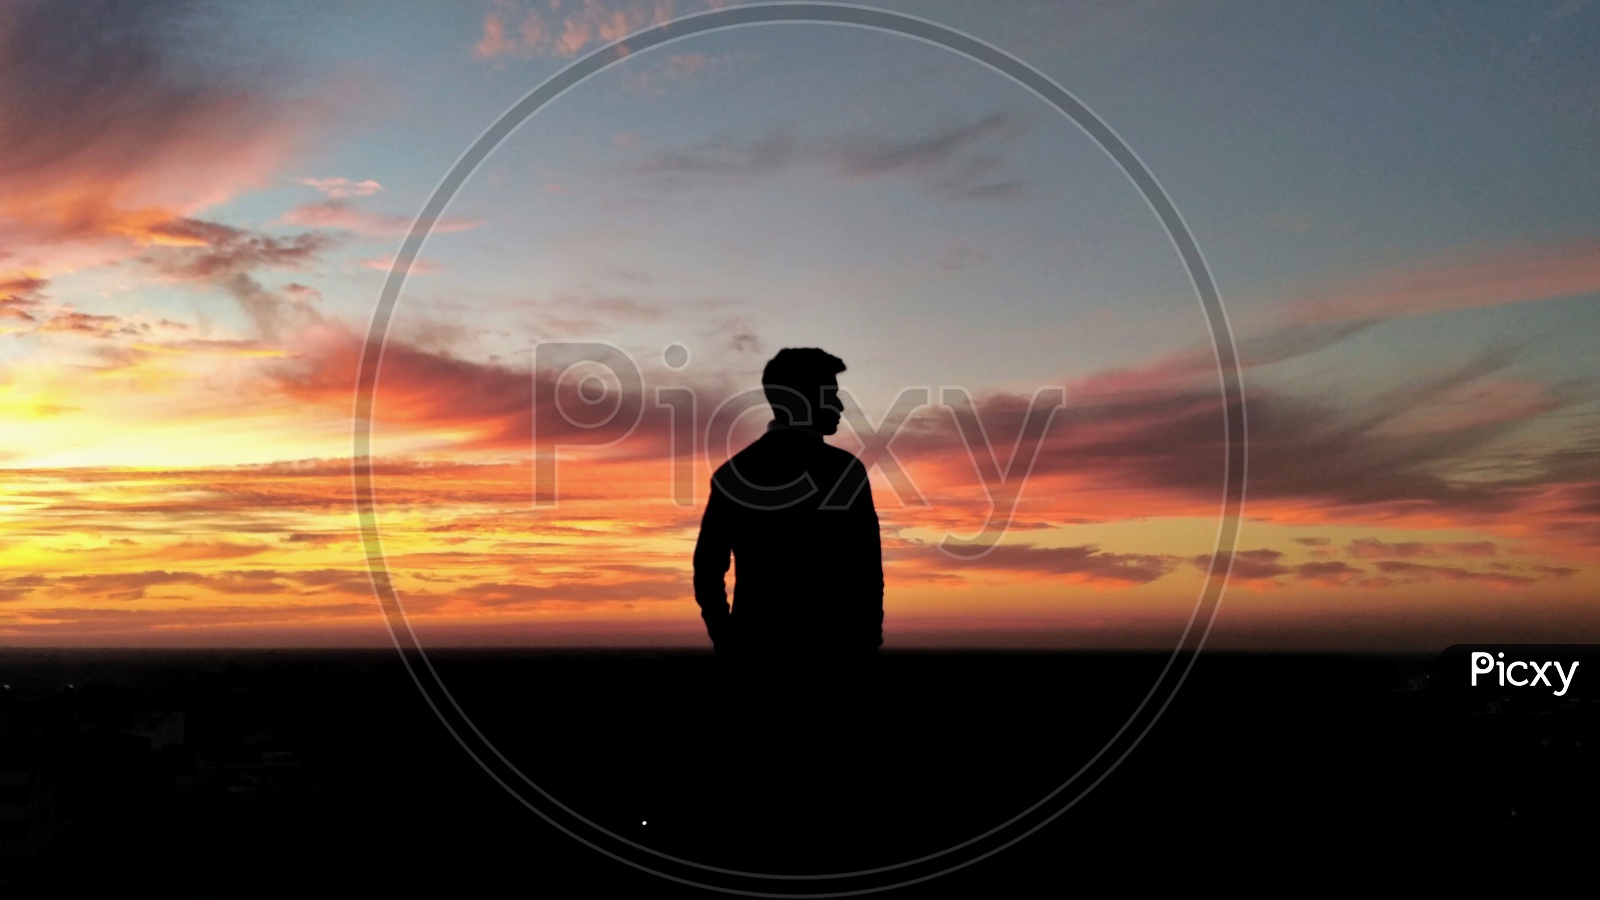 Silhouette of Young Man Standing Alone, Depression